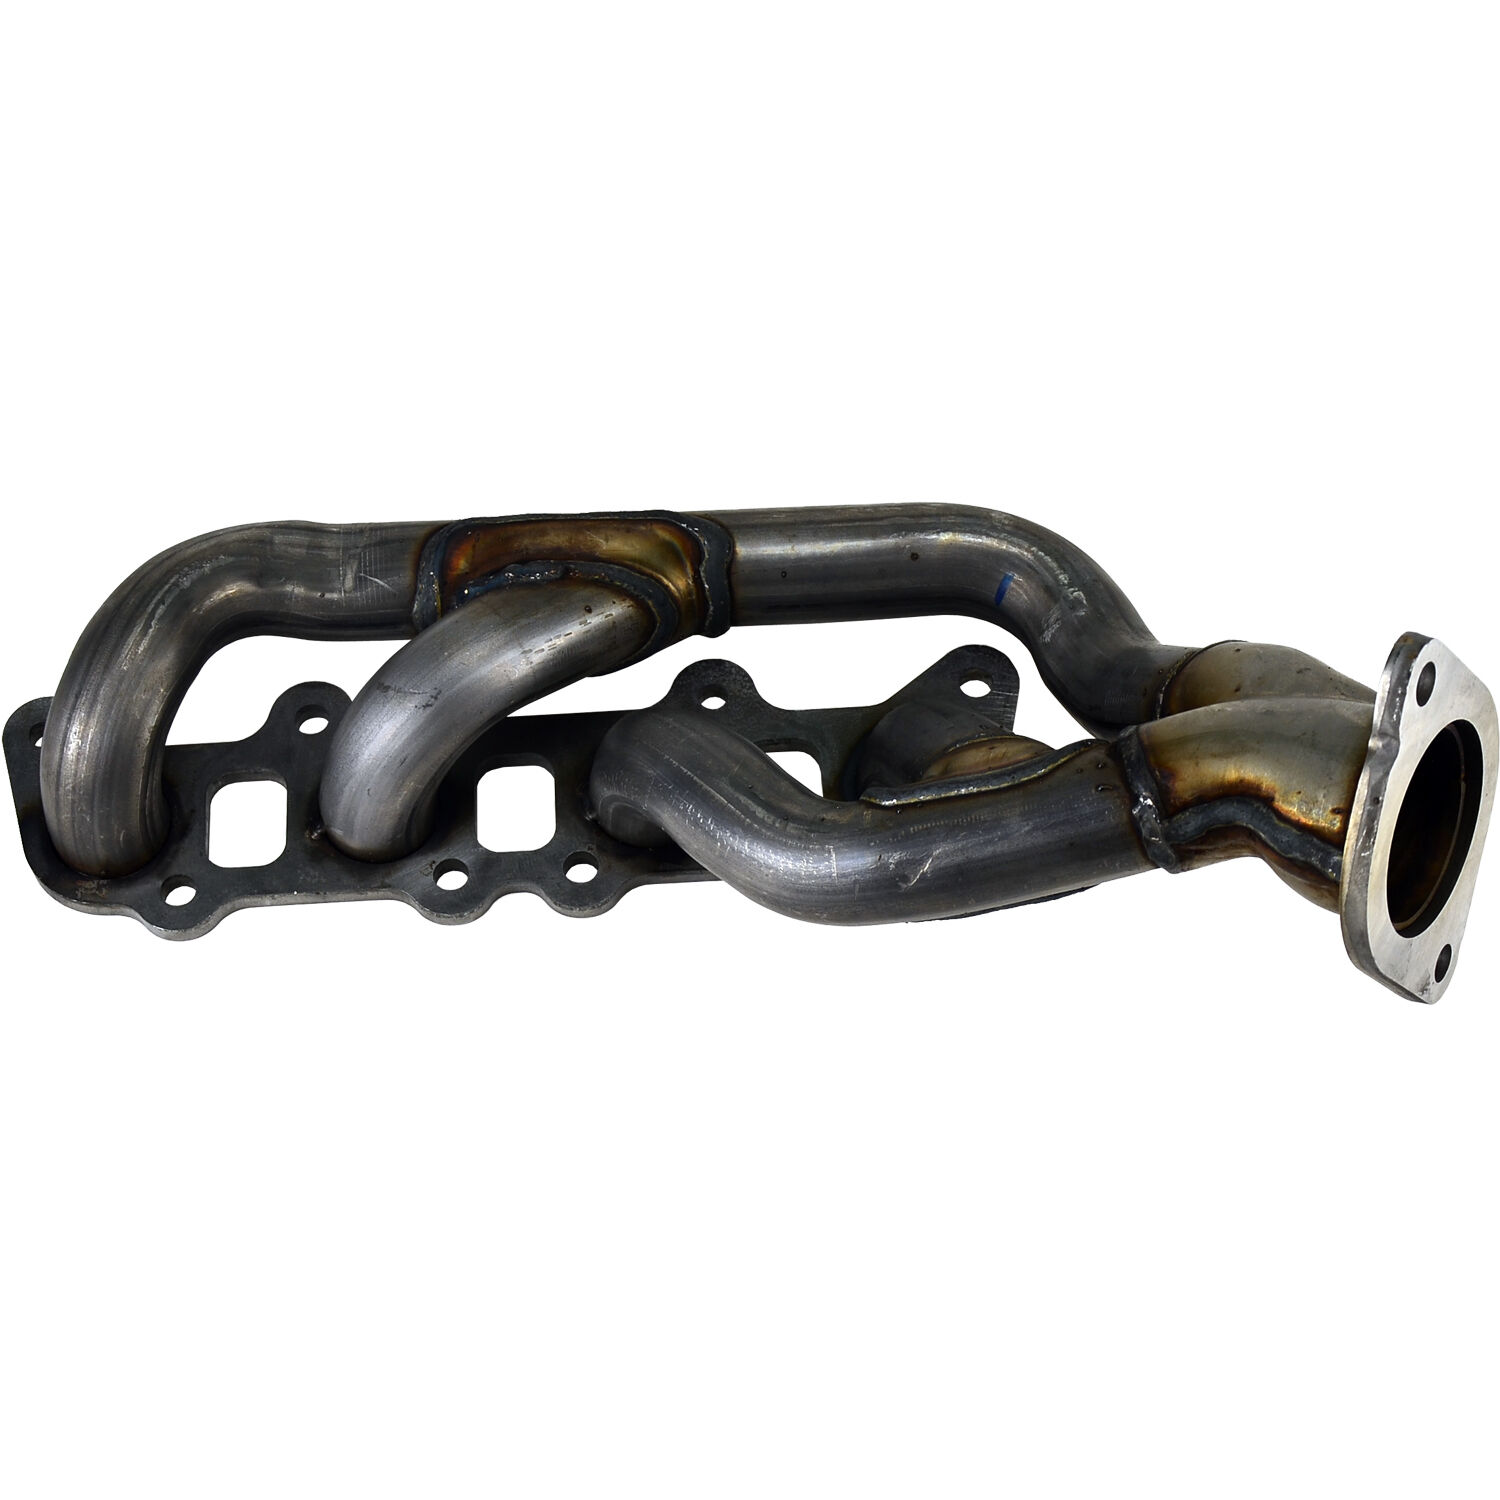 OEM NEW 2011-2014 Ford Mustang LH Side Exhaust Manifold BR3Z9431C Driver\'s Side